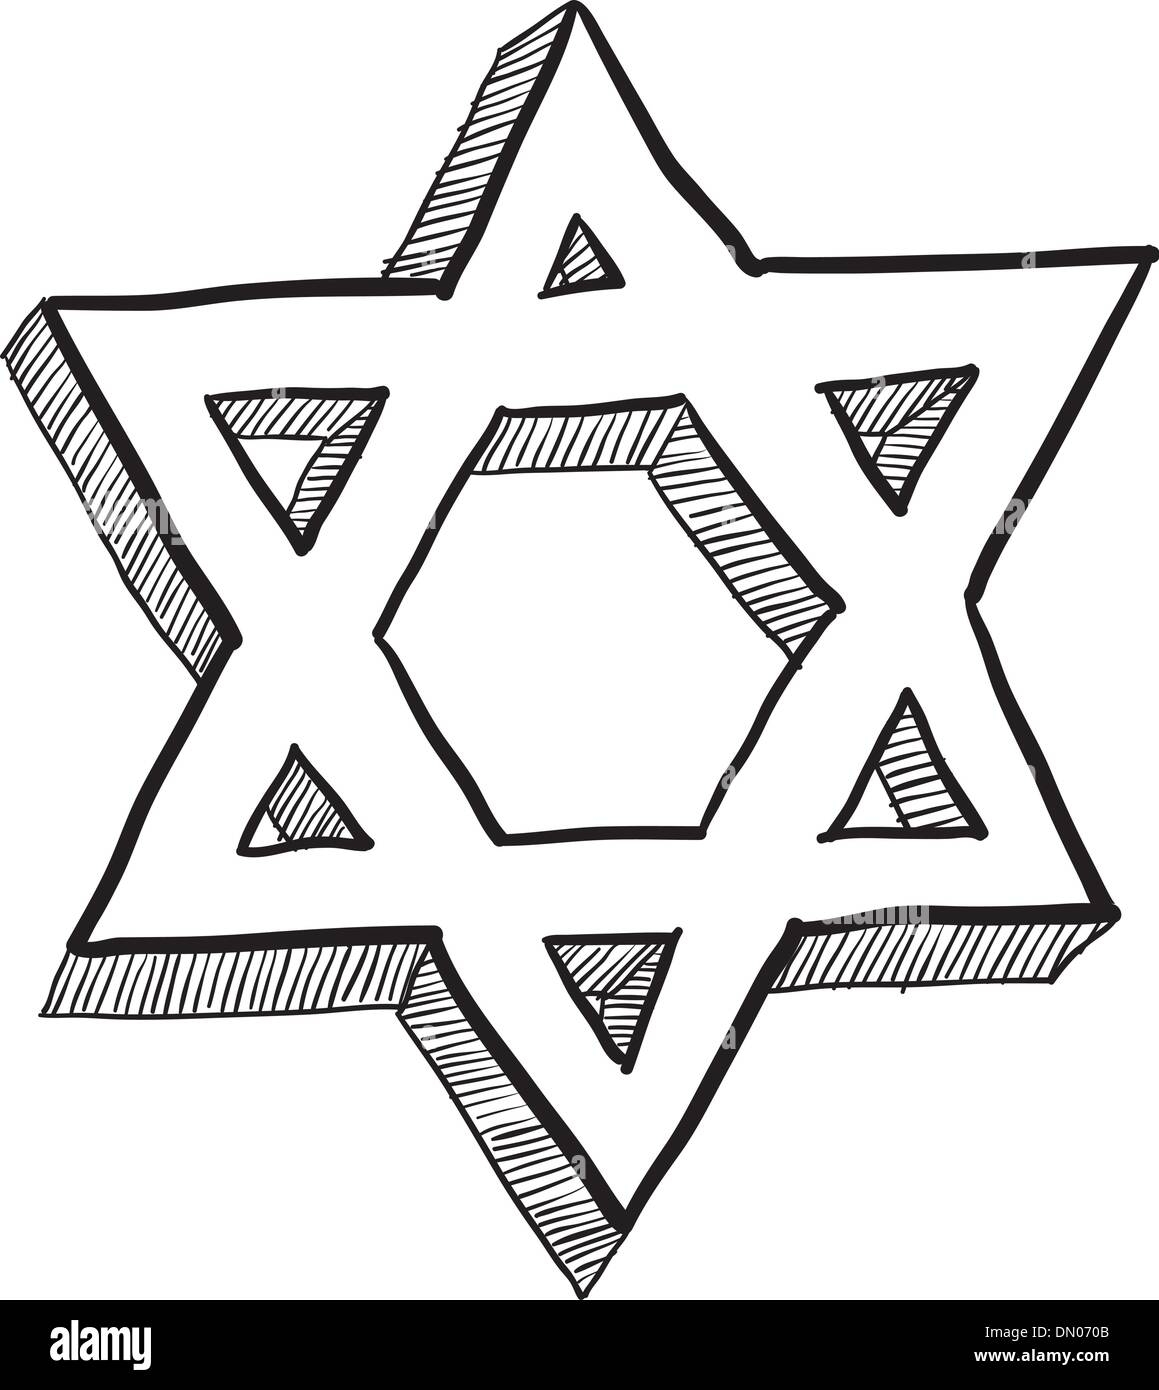 Star Of David Black And White Stock Photos Images Alamy